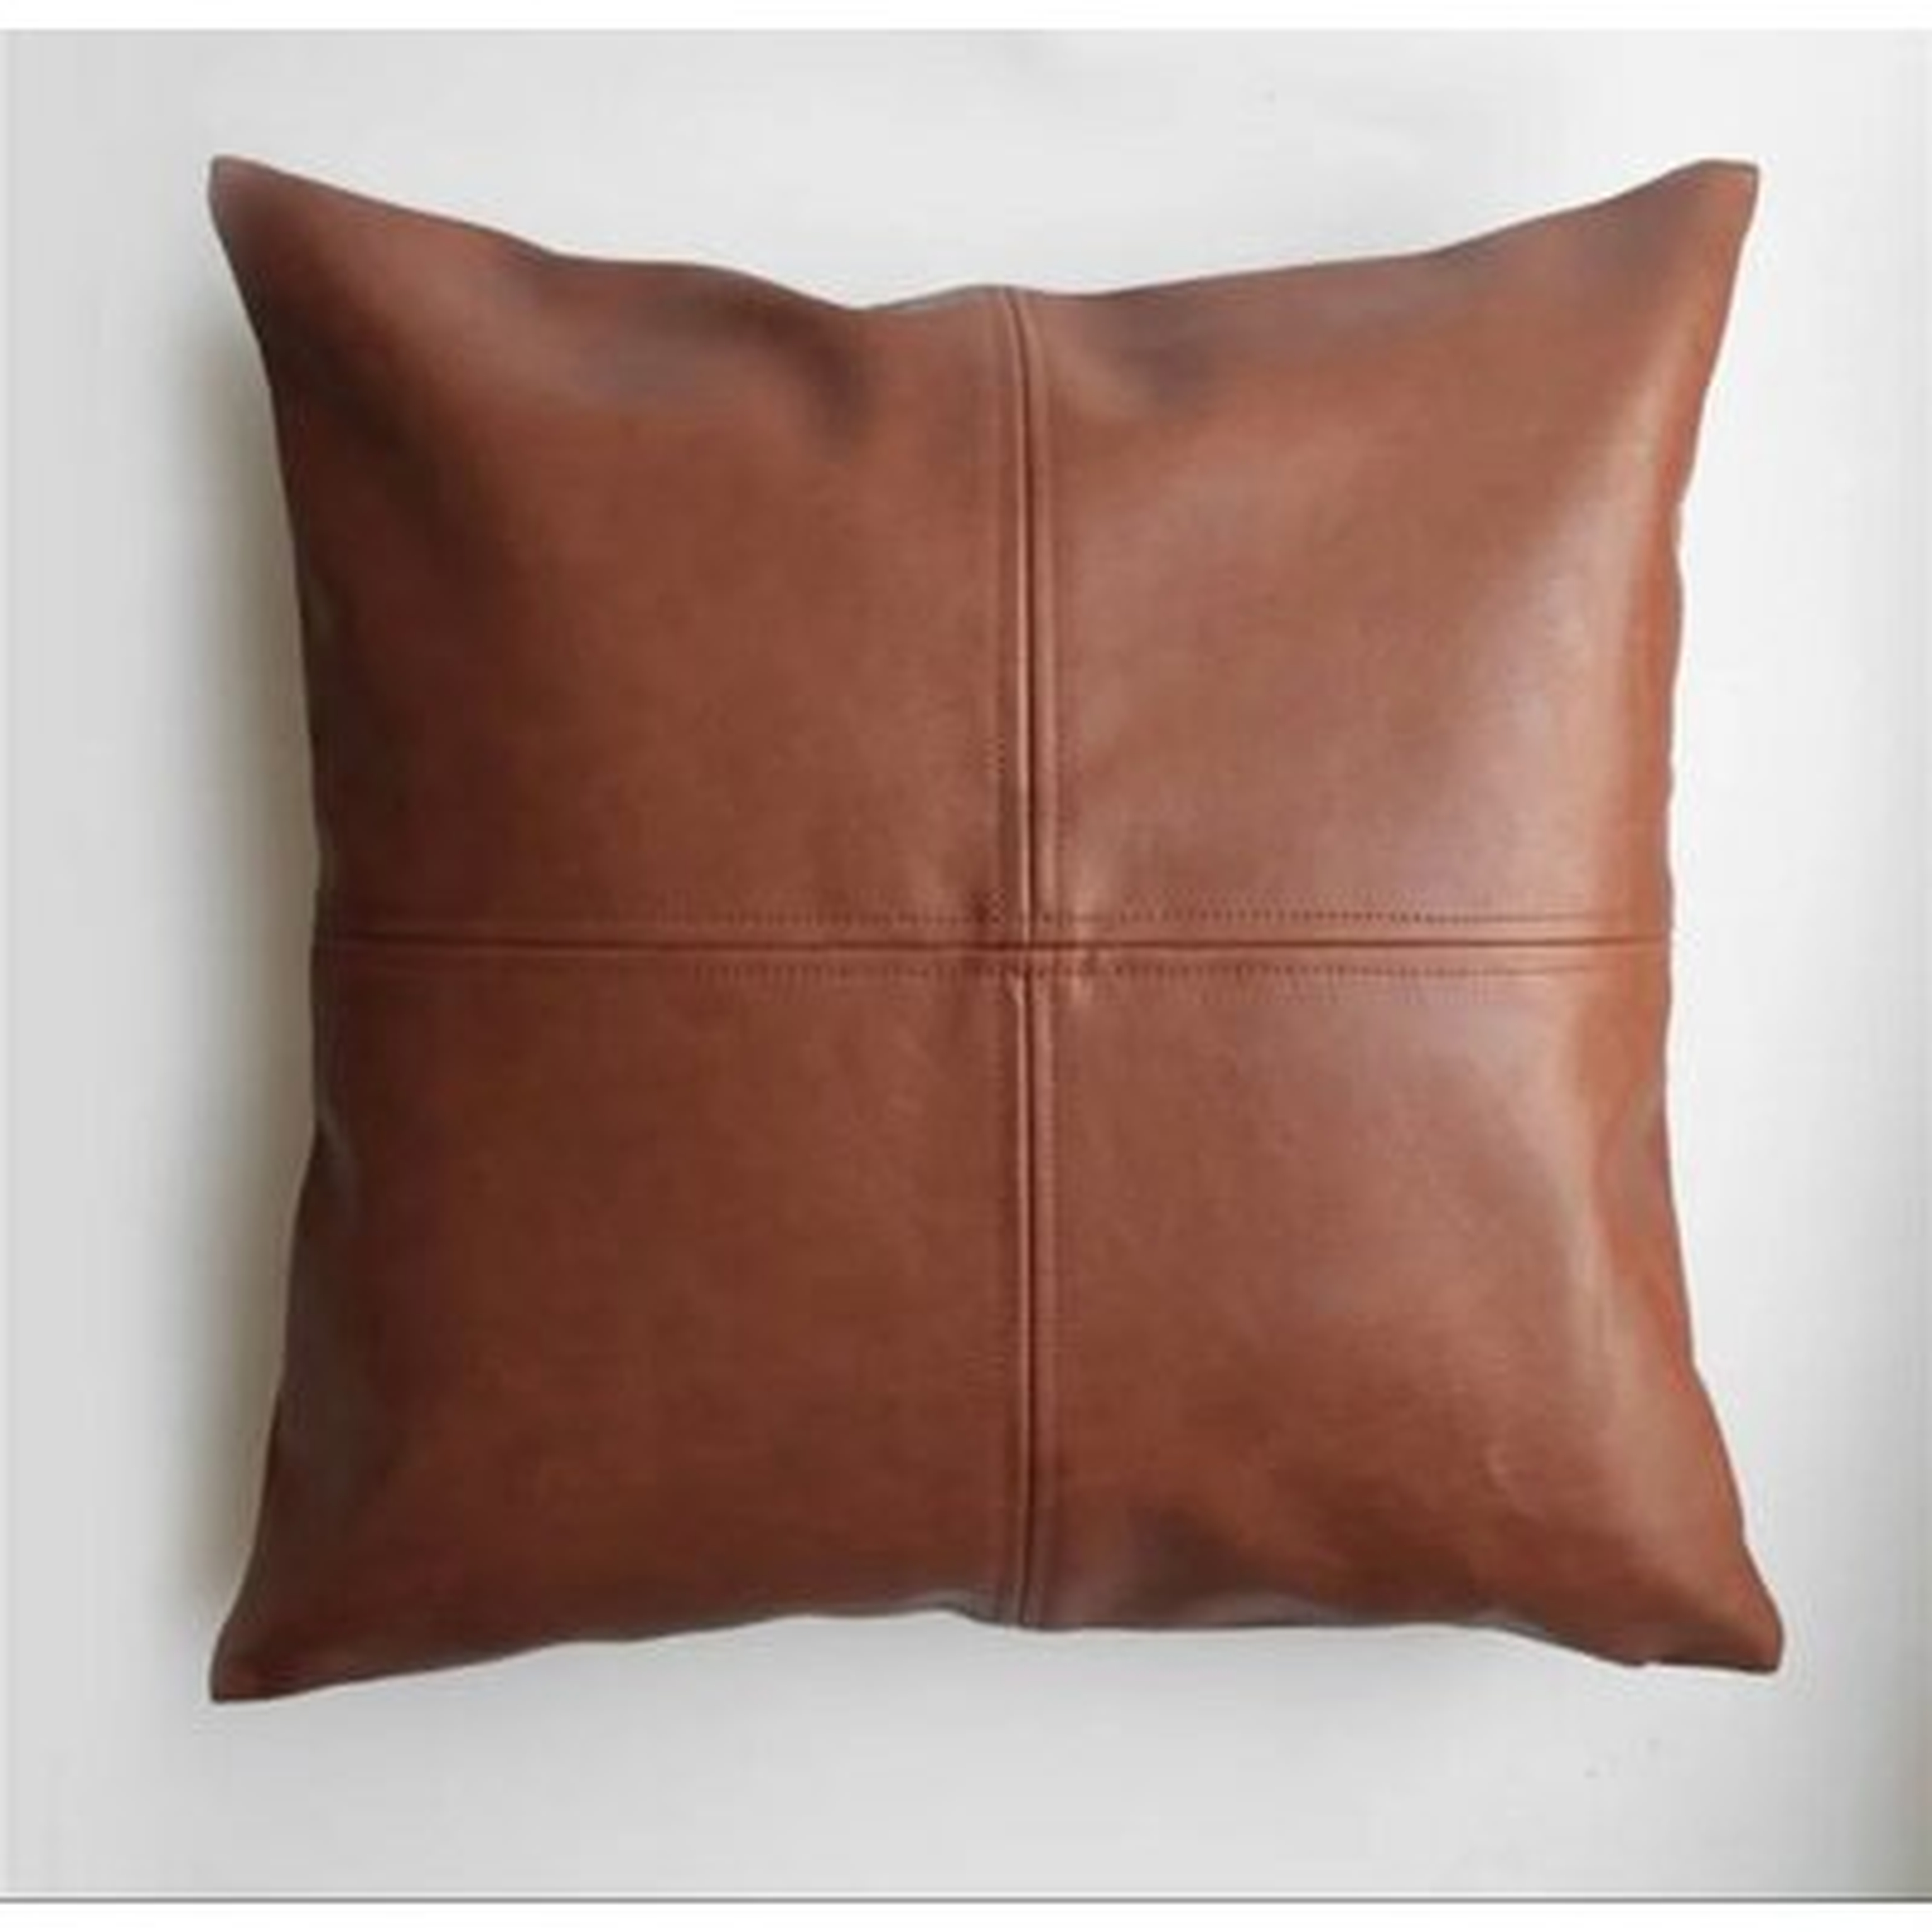 Quad Stitched Faux Leather Throw Pillow Cover, 18x18 Inches - Wayfair